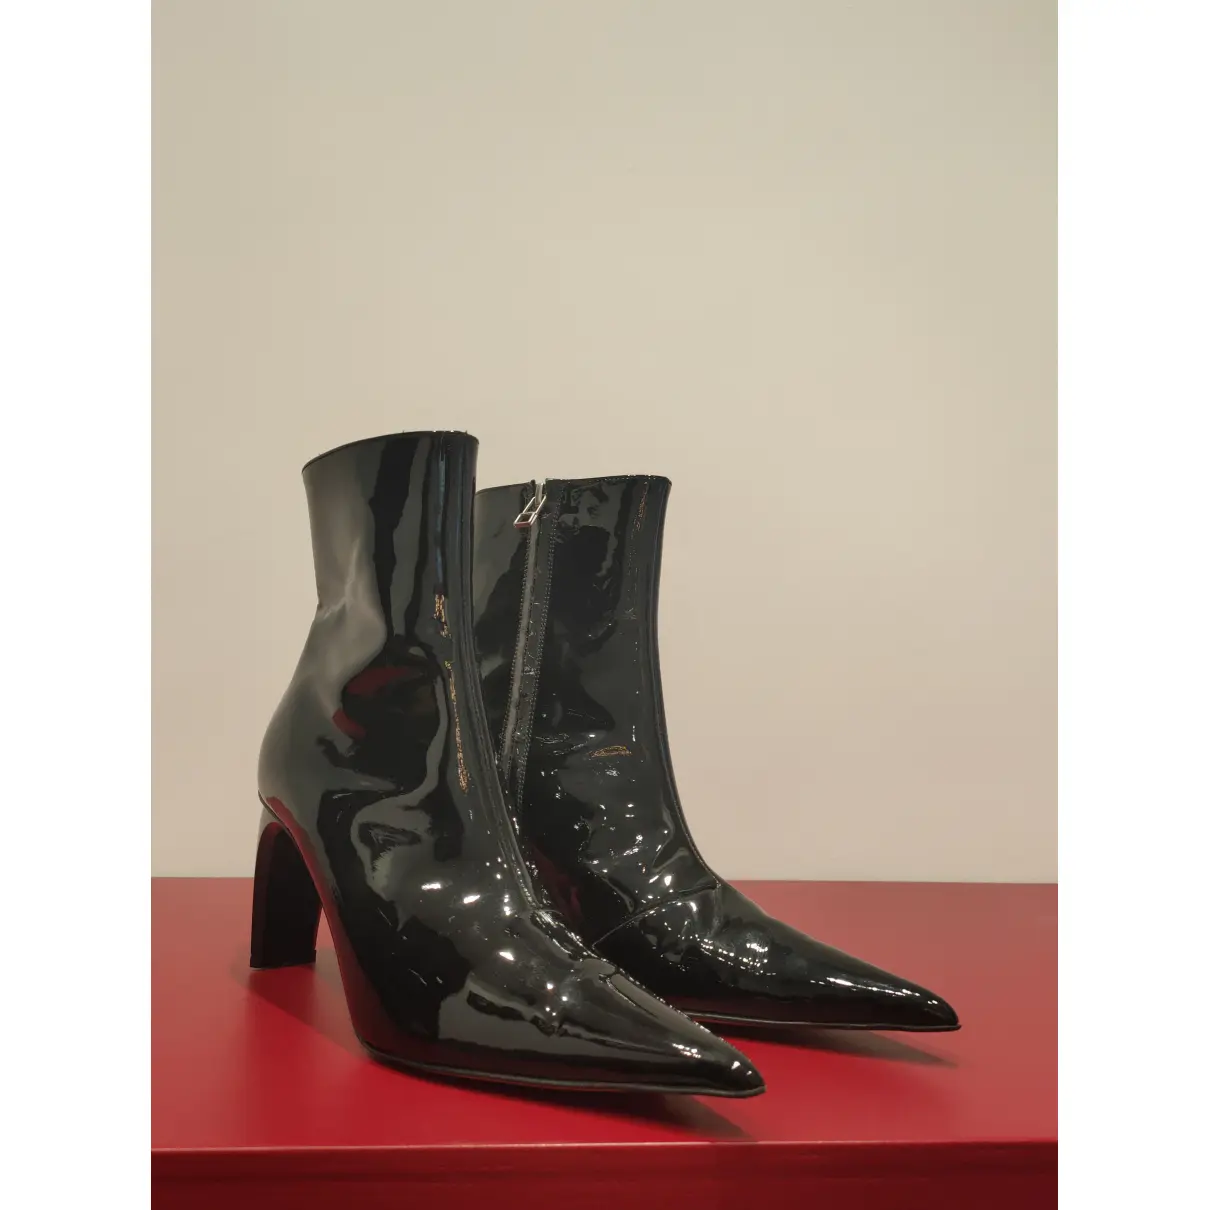 Buy Misbhv Patent leather ankle boots online